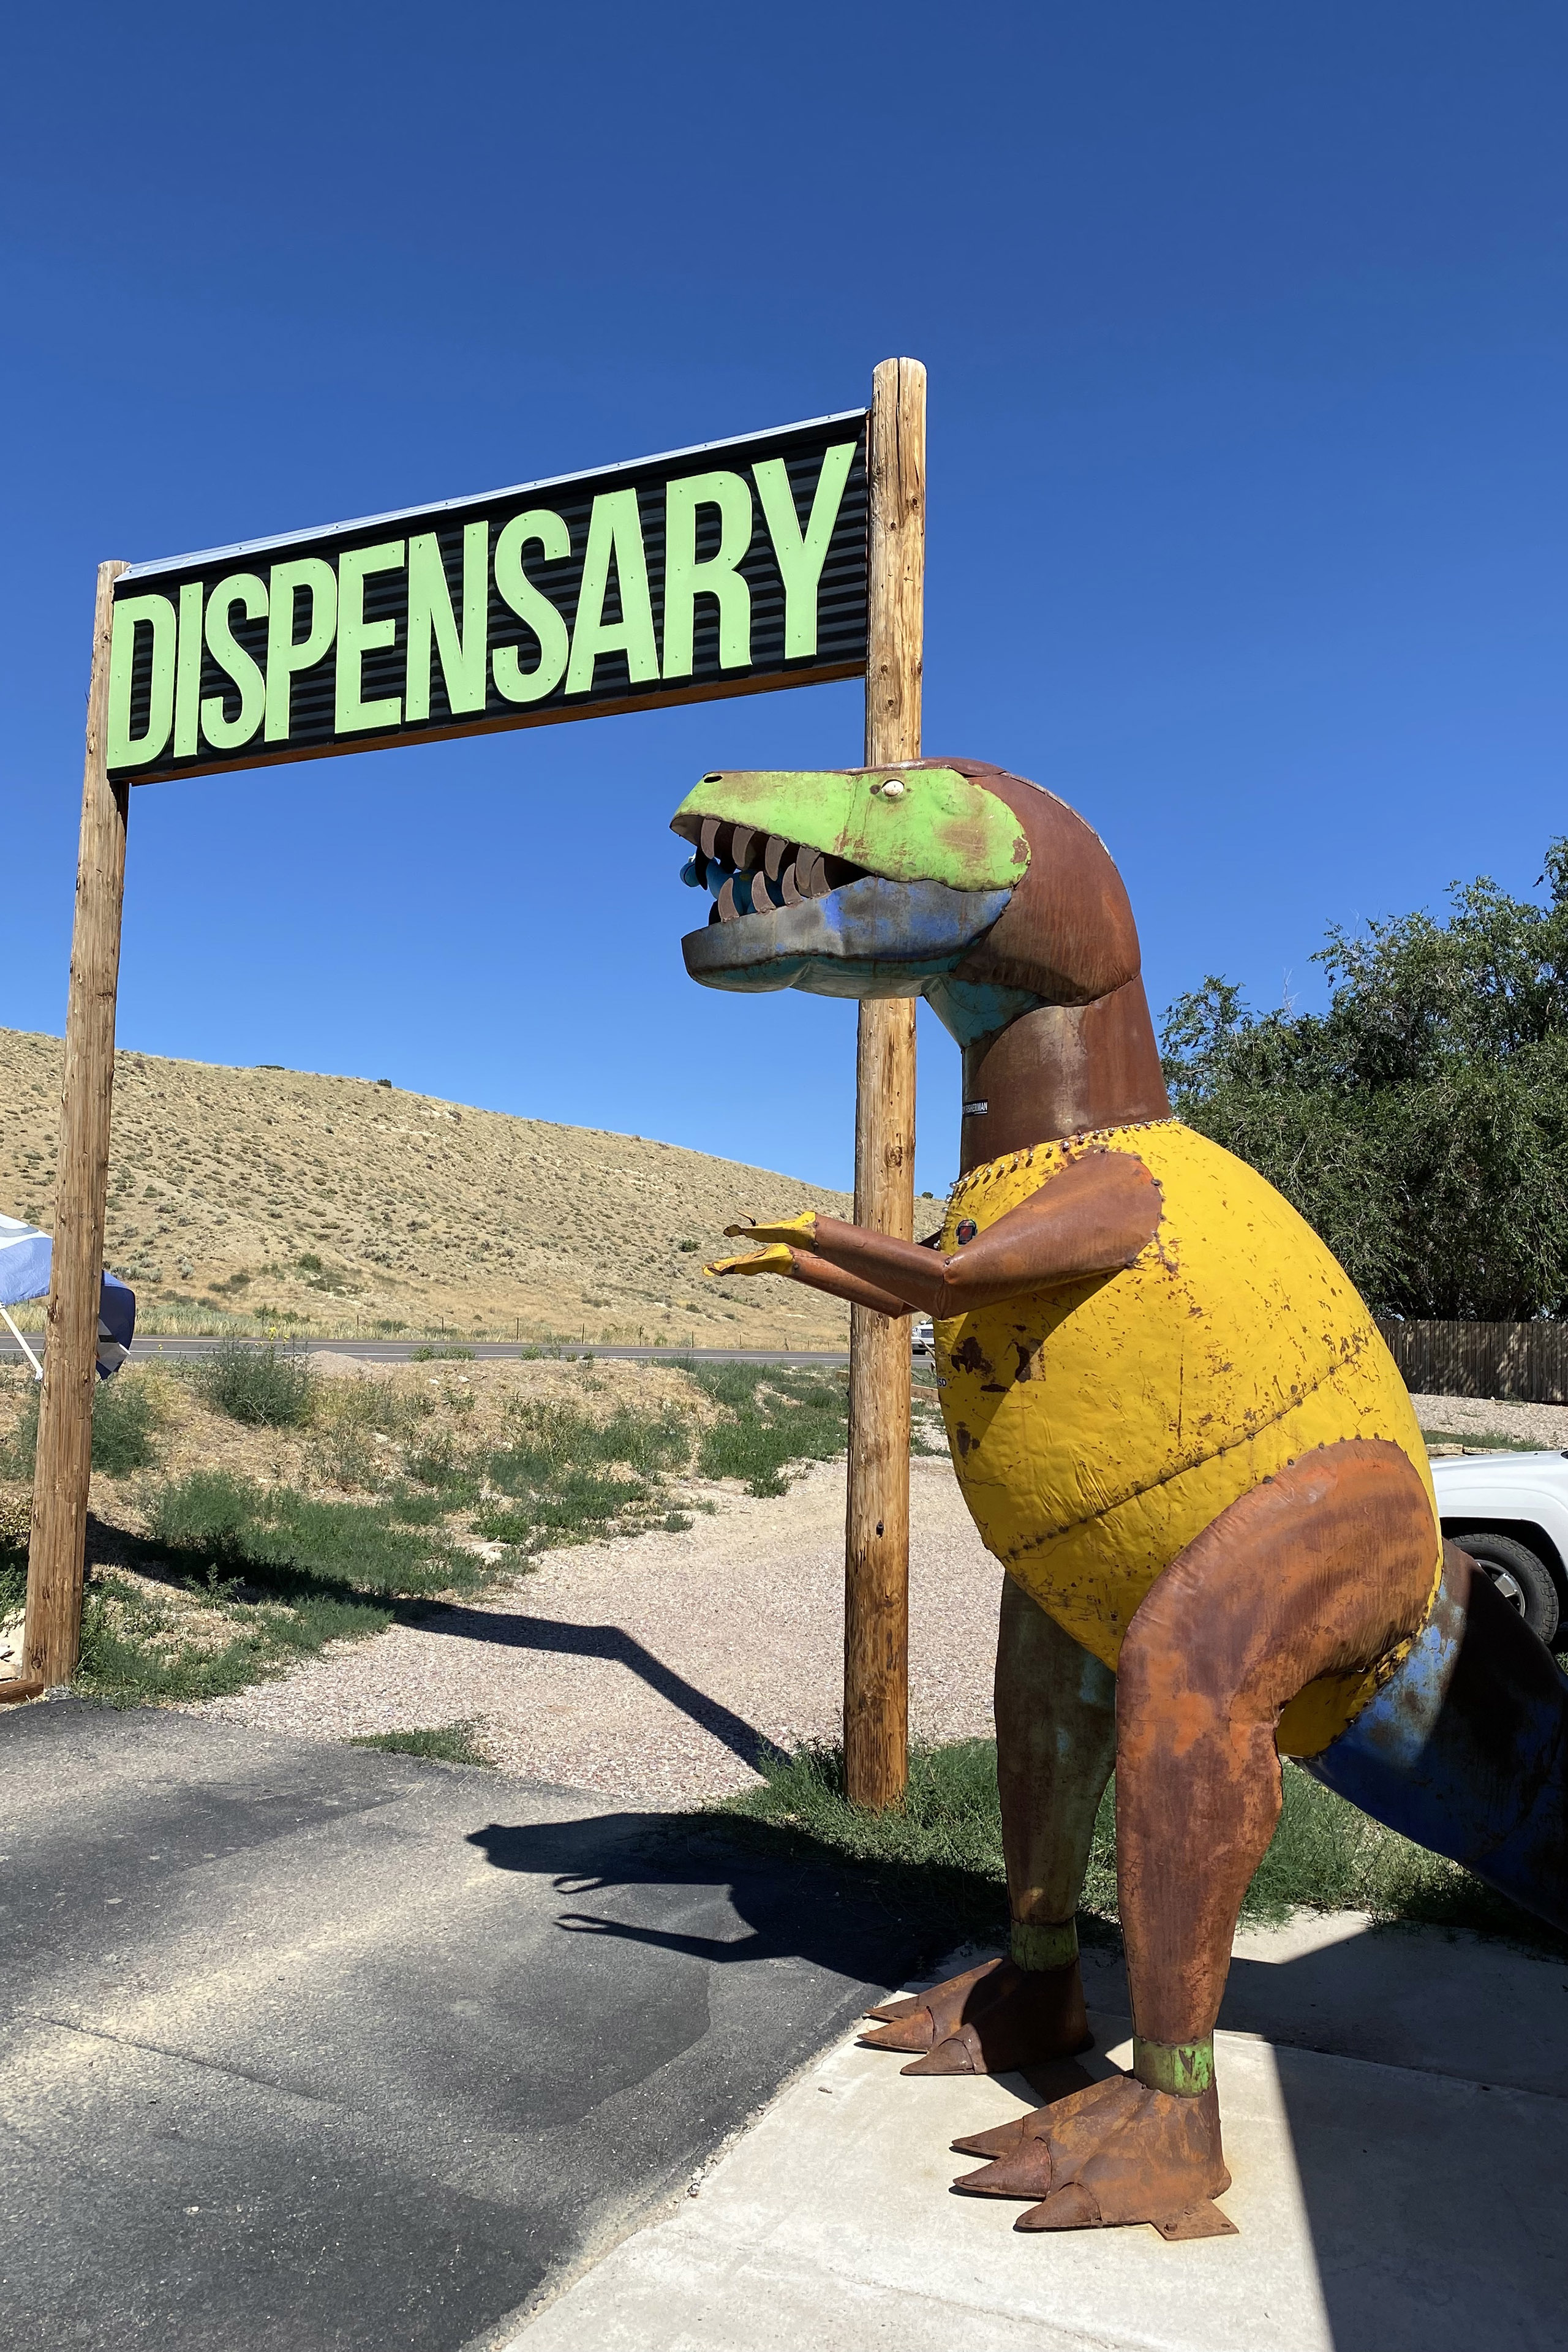 A colorfully painted metal dinosaur, which looks to be approximately over 7 feet tall, stands beside a sign that reads: "DISPENSARY"